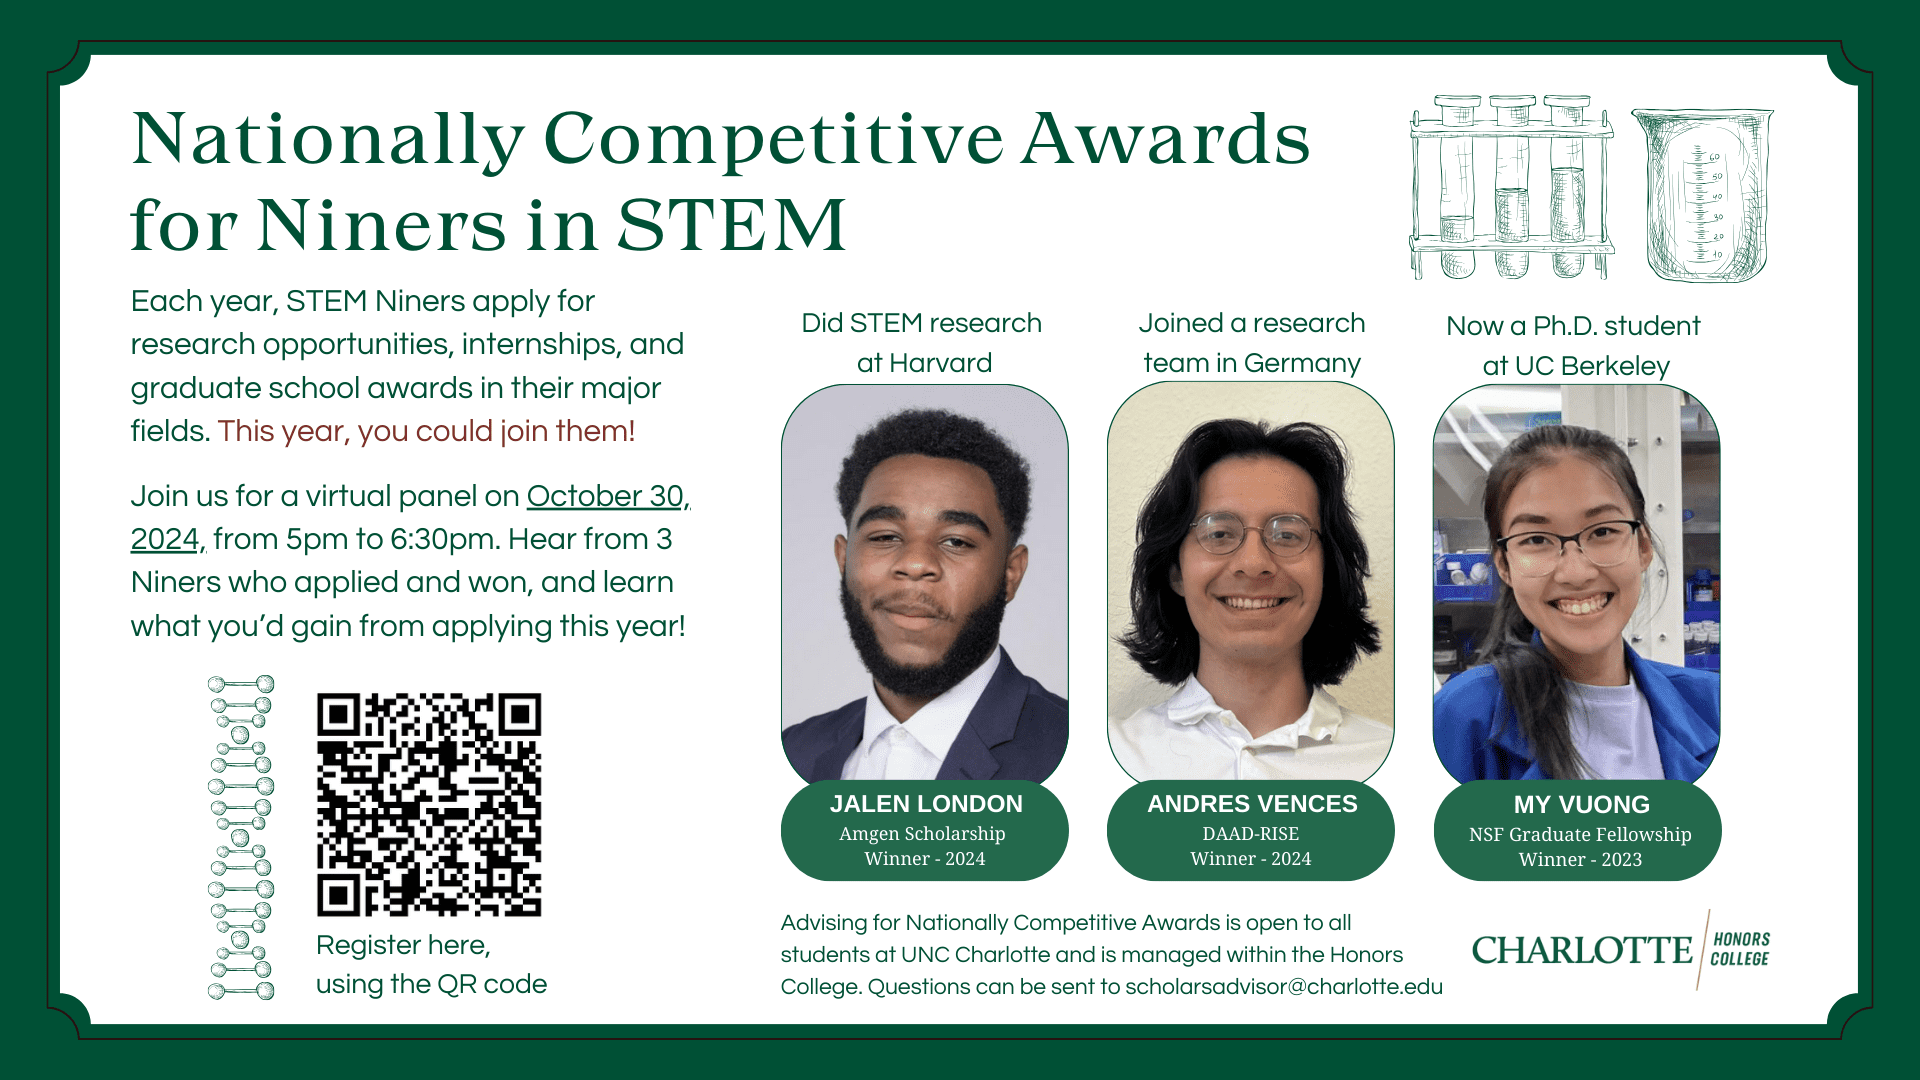 Nationally Competitive Awards for Niners in STEM. Each year, STEM Niners apply for research opportunities, internships, and graduate school awards in their major fields. This year, you could join them! Join us for a virtual panel on October 30, 2024, from 5pm to 6:30pm. Hear from 3 Niners who applied and won, and learn what you'd gain from applying this year! Register Here, using the QR code. 

Did STEM research at Harvard: Jaden London, Amgen Scholarship Winner - 2024
Joined a research team in Germany: Andres Vences, DAAD-RISE Winner - 2024
Now a Ph.D. student at UC Berkely: My Vuong, NSF Graduate Fellowship Winner - 2023

Advising for Nationally Competitive Awards is open to all students at UNC Charlotte and is managed within the Honors College. Questions can be sent to scholarsadvisor@charlotte.edu